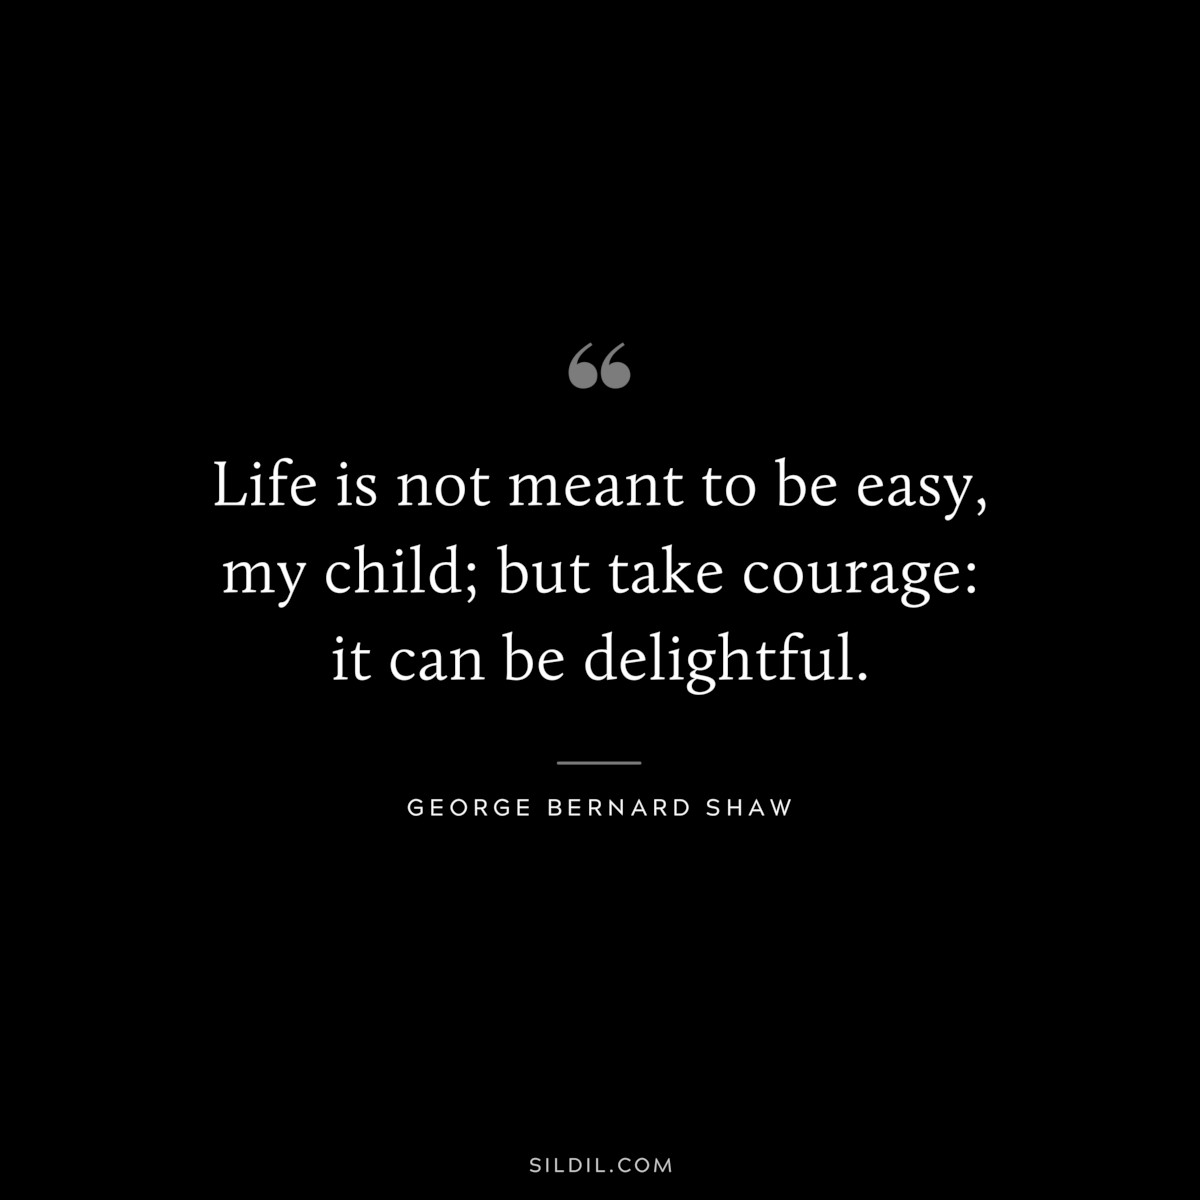 Life is not meant to be easy, my child; but take courage: it can be delightful. ― George Bernard Shaw